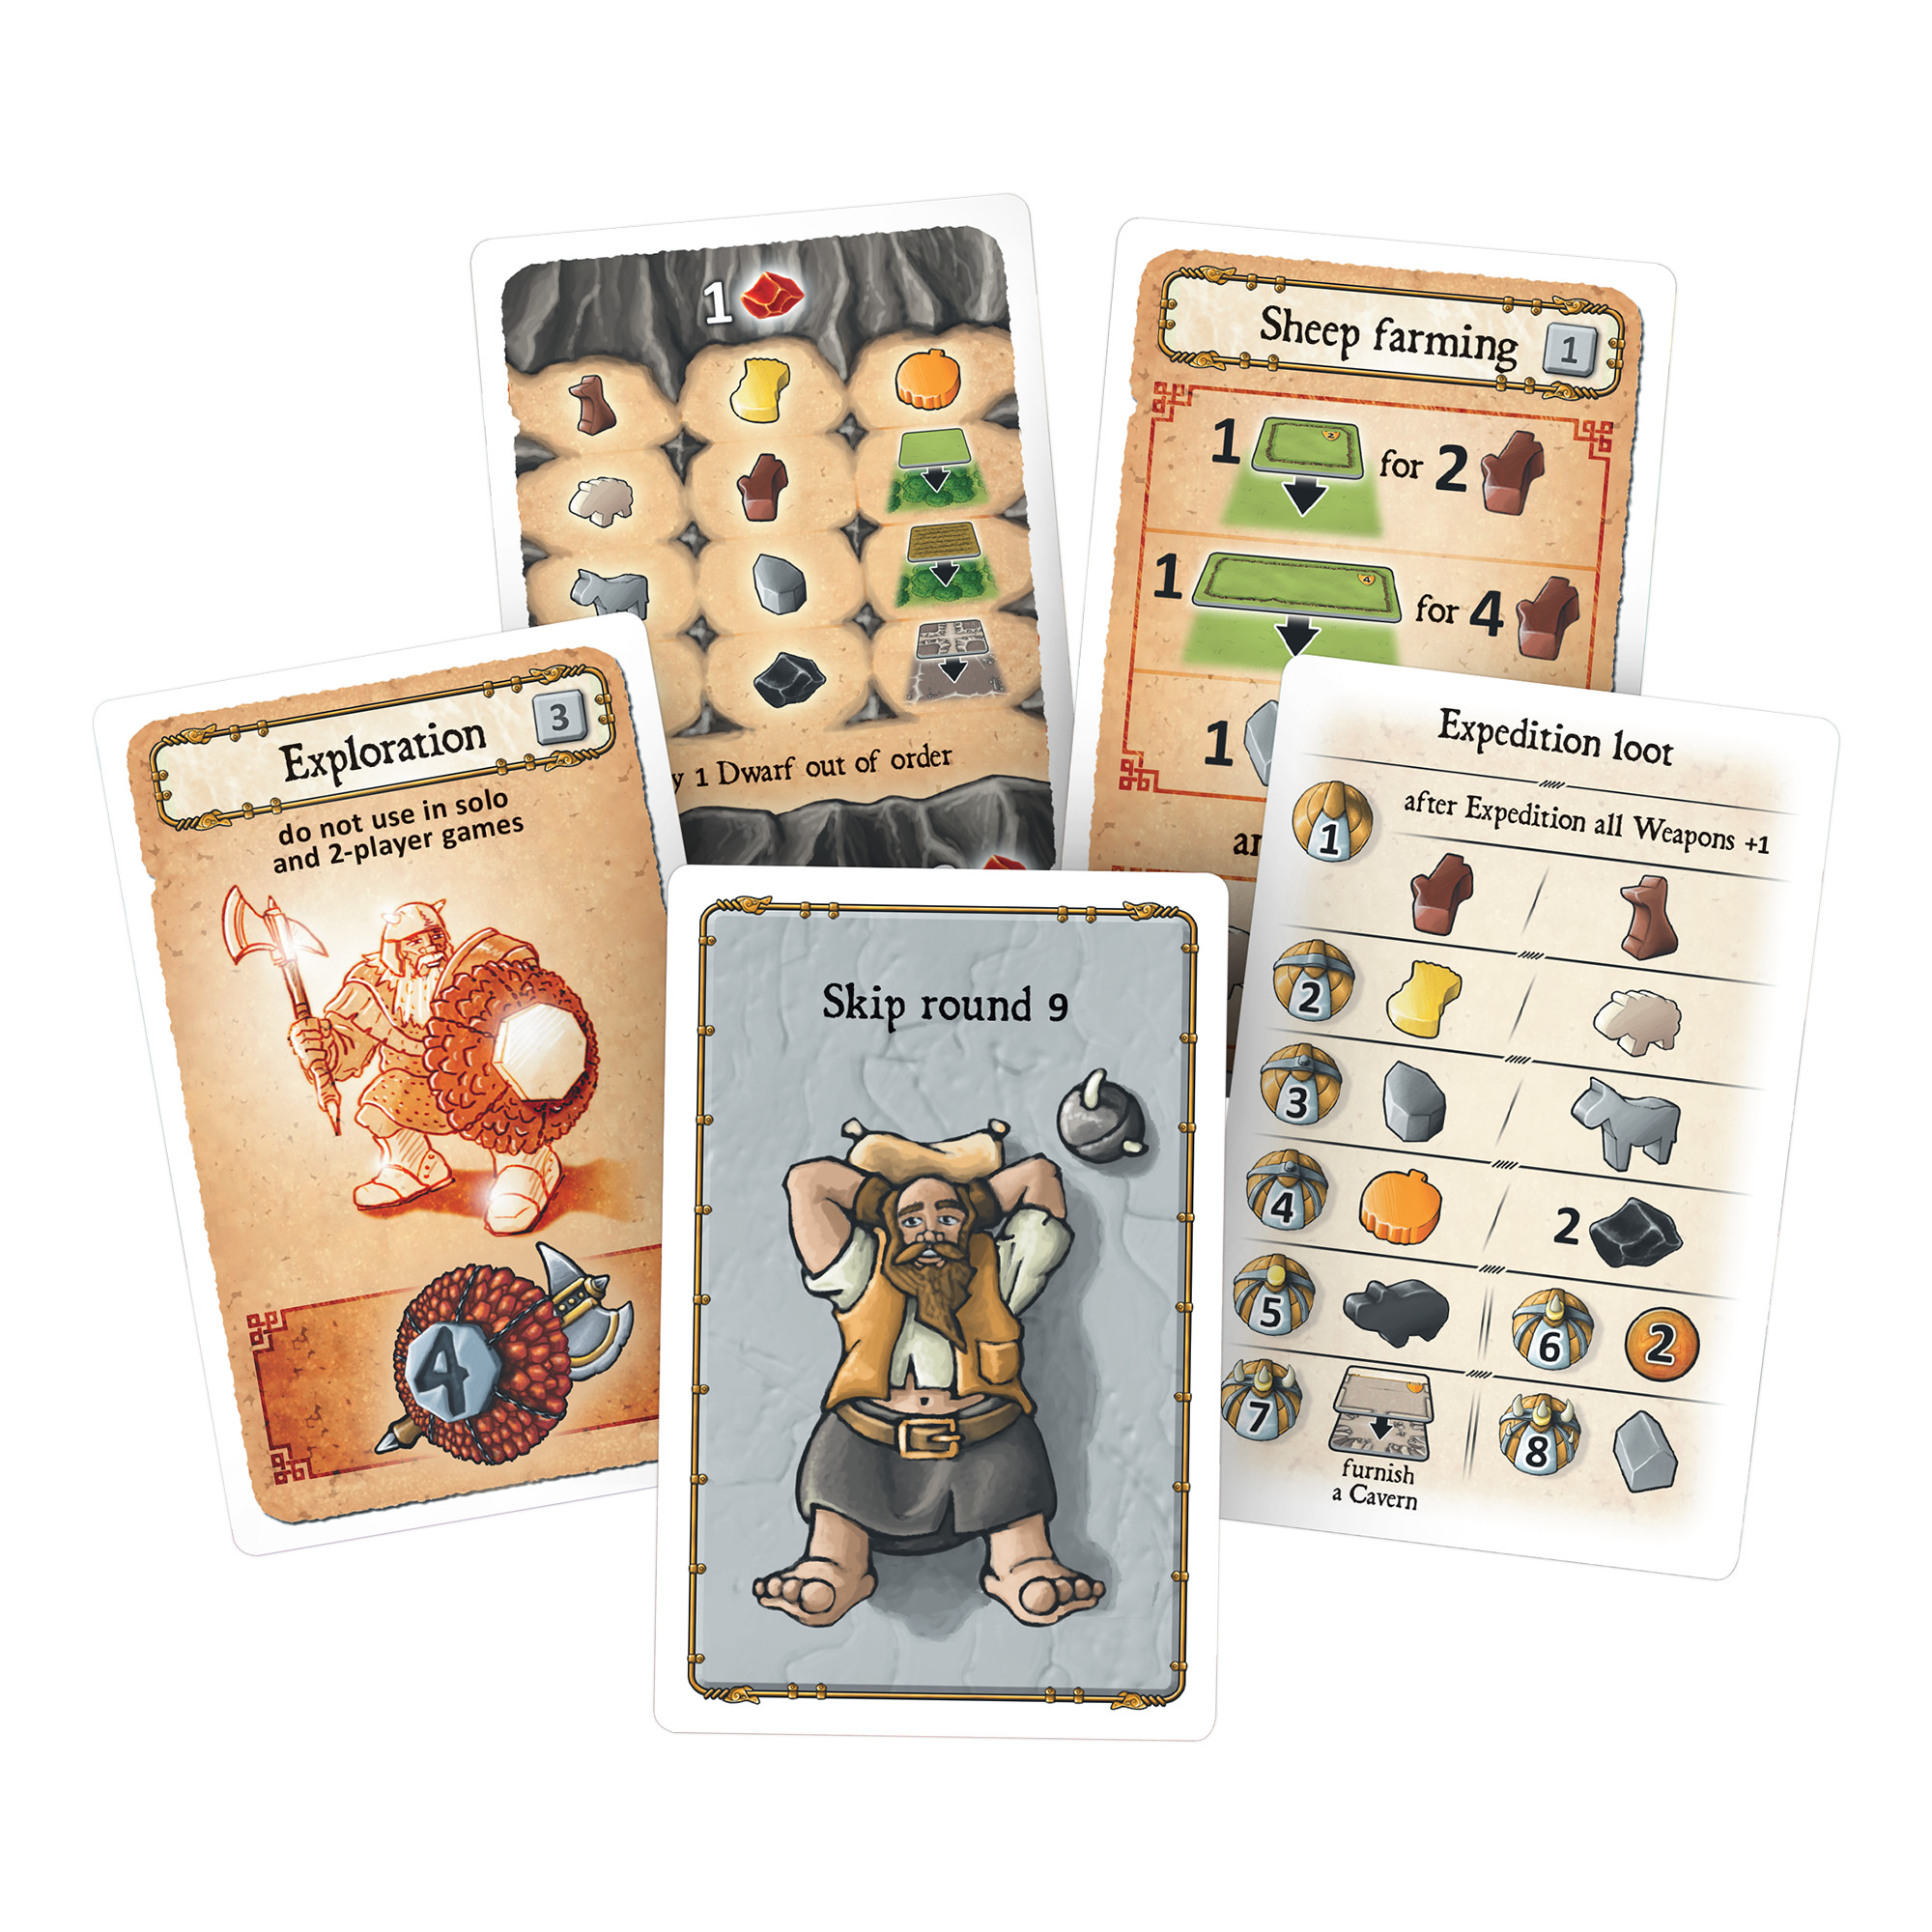 Caverna: The Cave Farmers Strategy Board Game for ages 12 and up, from Asmodee - image 4 of 5